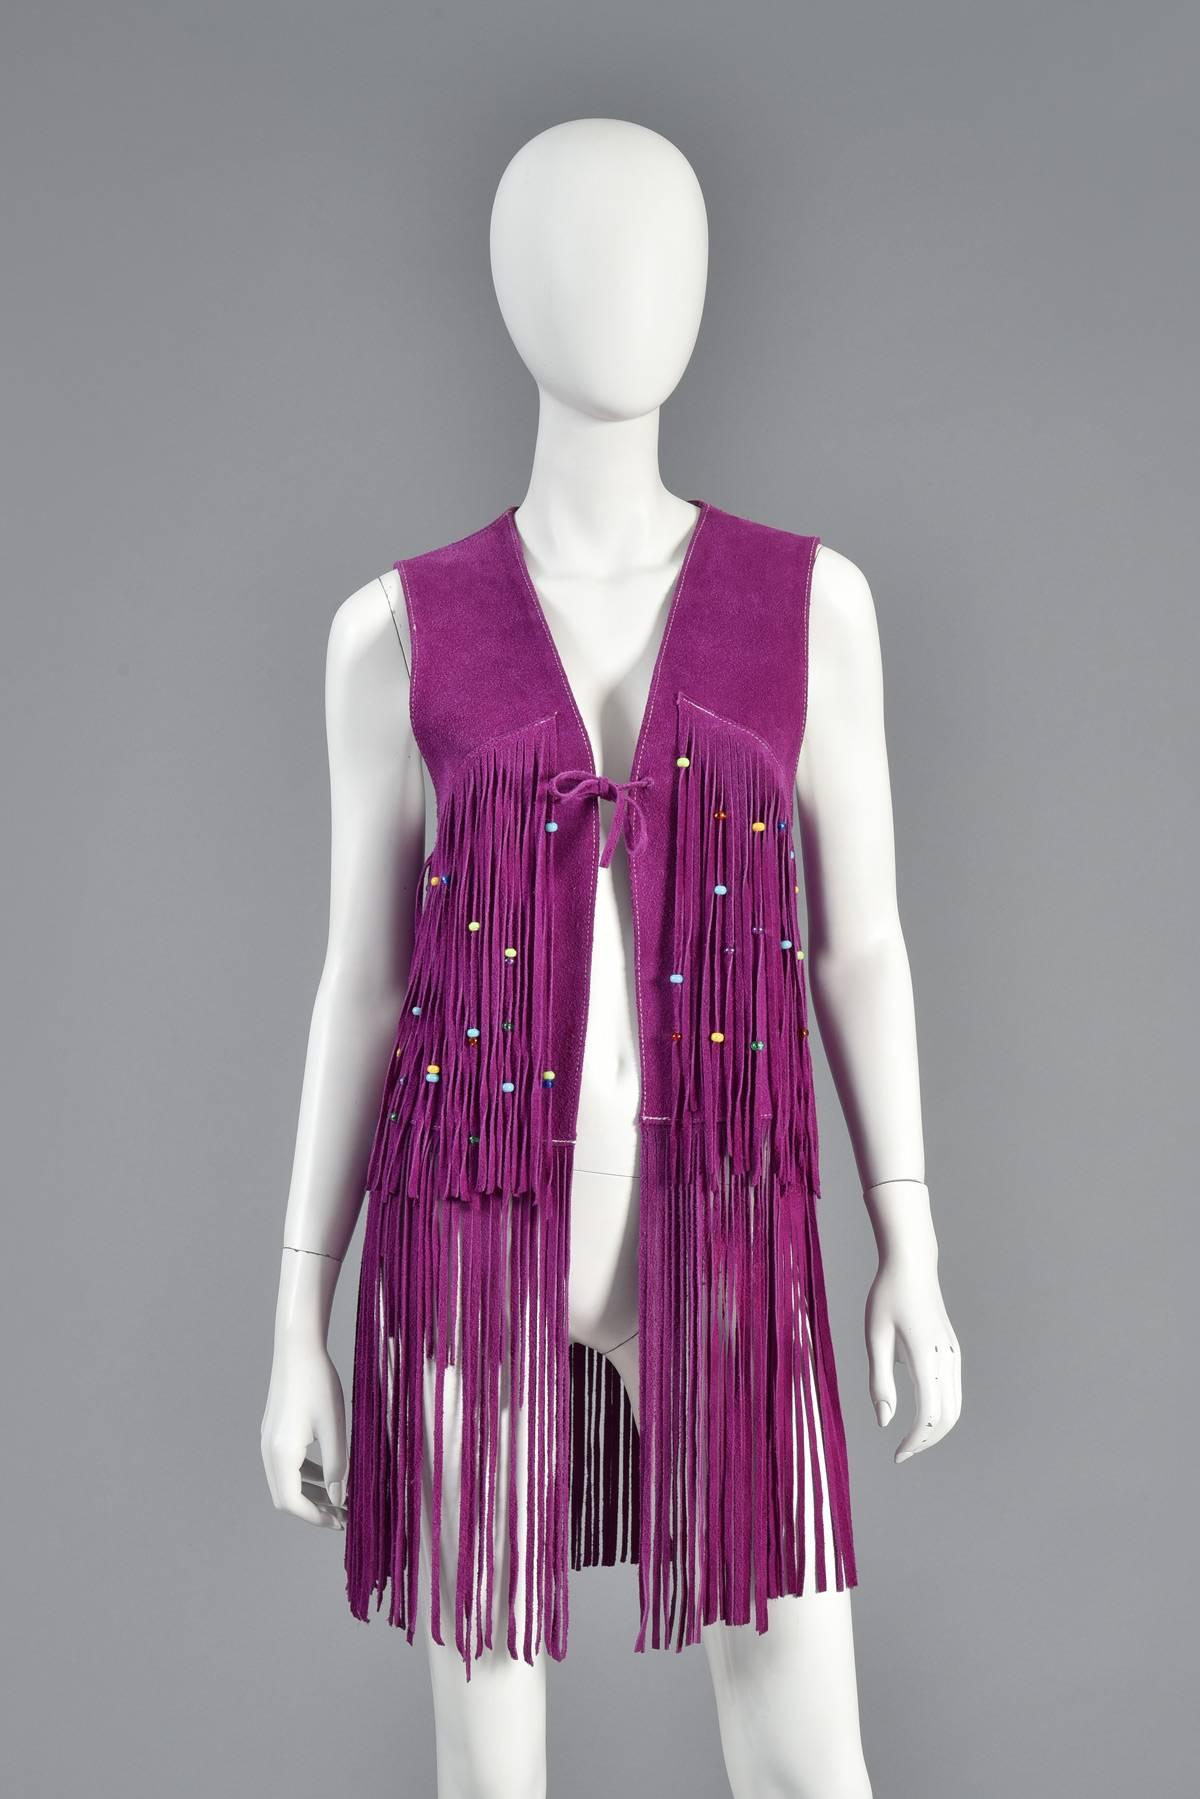 Absolutely amazing and extremely hard to find vintage 1960s fringed suede vest. The fringe vests are an absolute must have for any 60s lover but the colored suede are considered the creme de la creme and are the hardest to find. This vest itself is